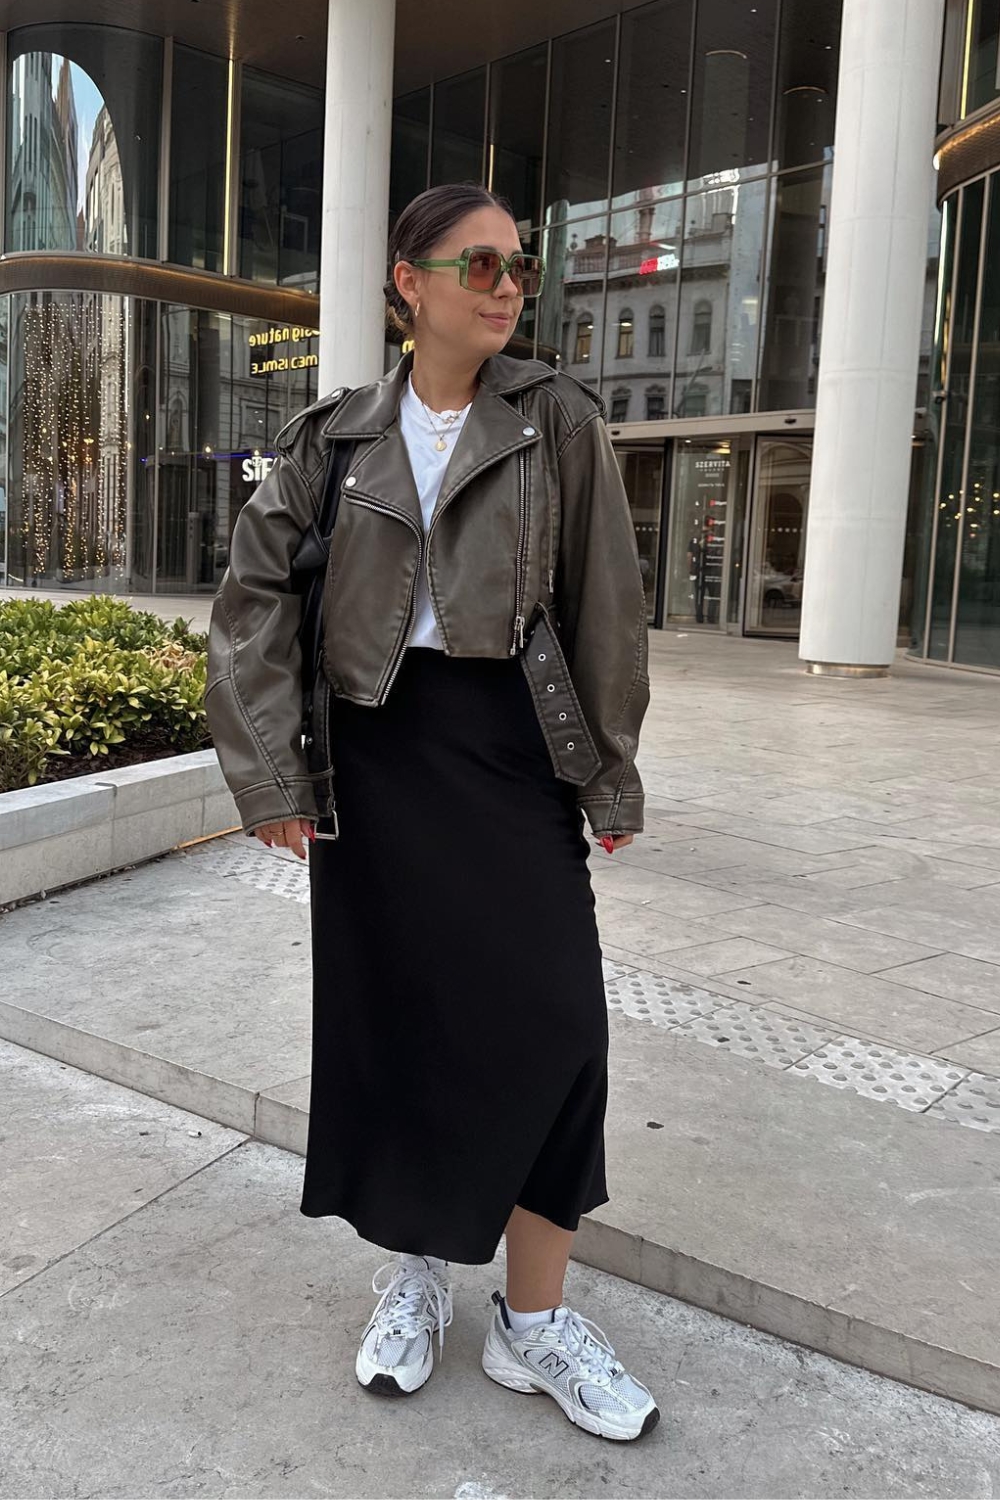 Casual Spring Outfit Ideas - Leather jacket with Satin Skirt